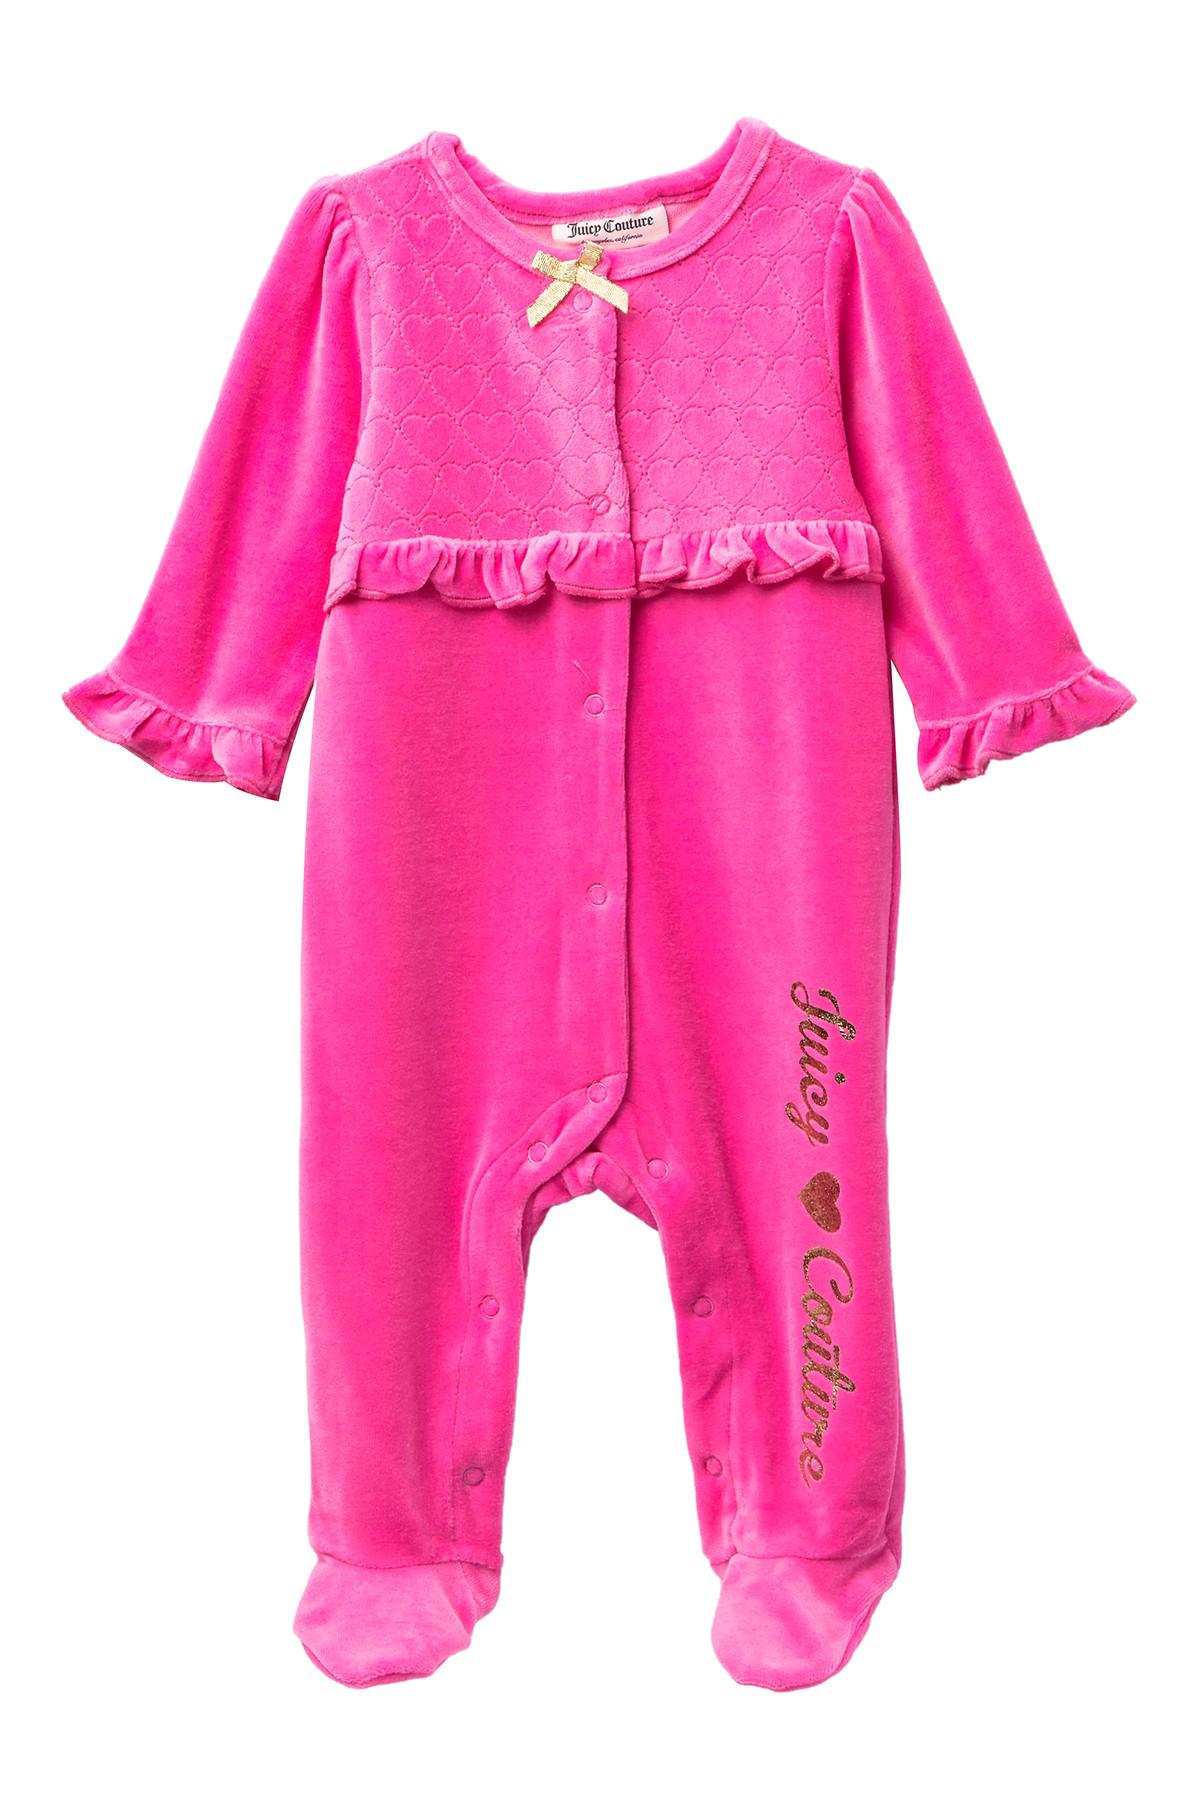 juicy couture baby clothes